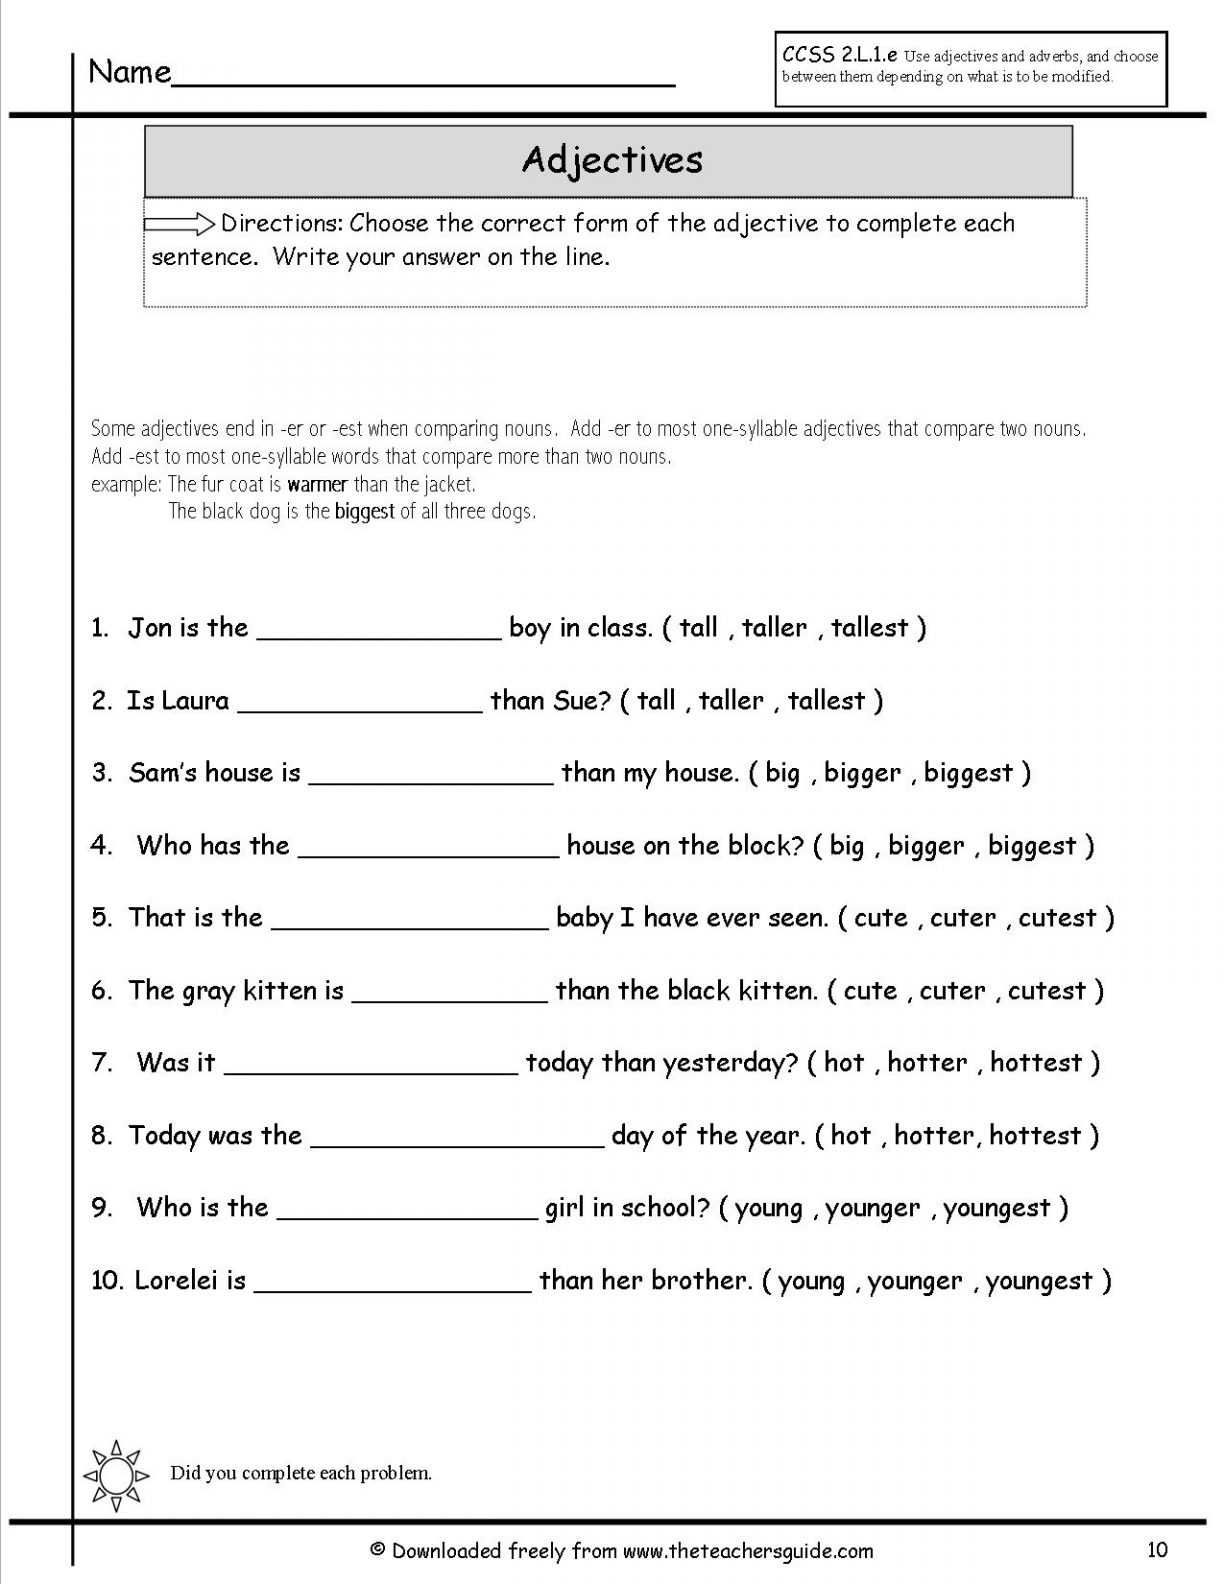 English Worksheets Exercises and Grade Articles Worksheet Worksheets for Kids with Answer Pdf English